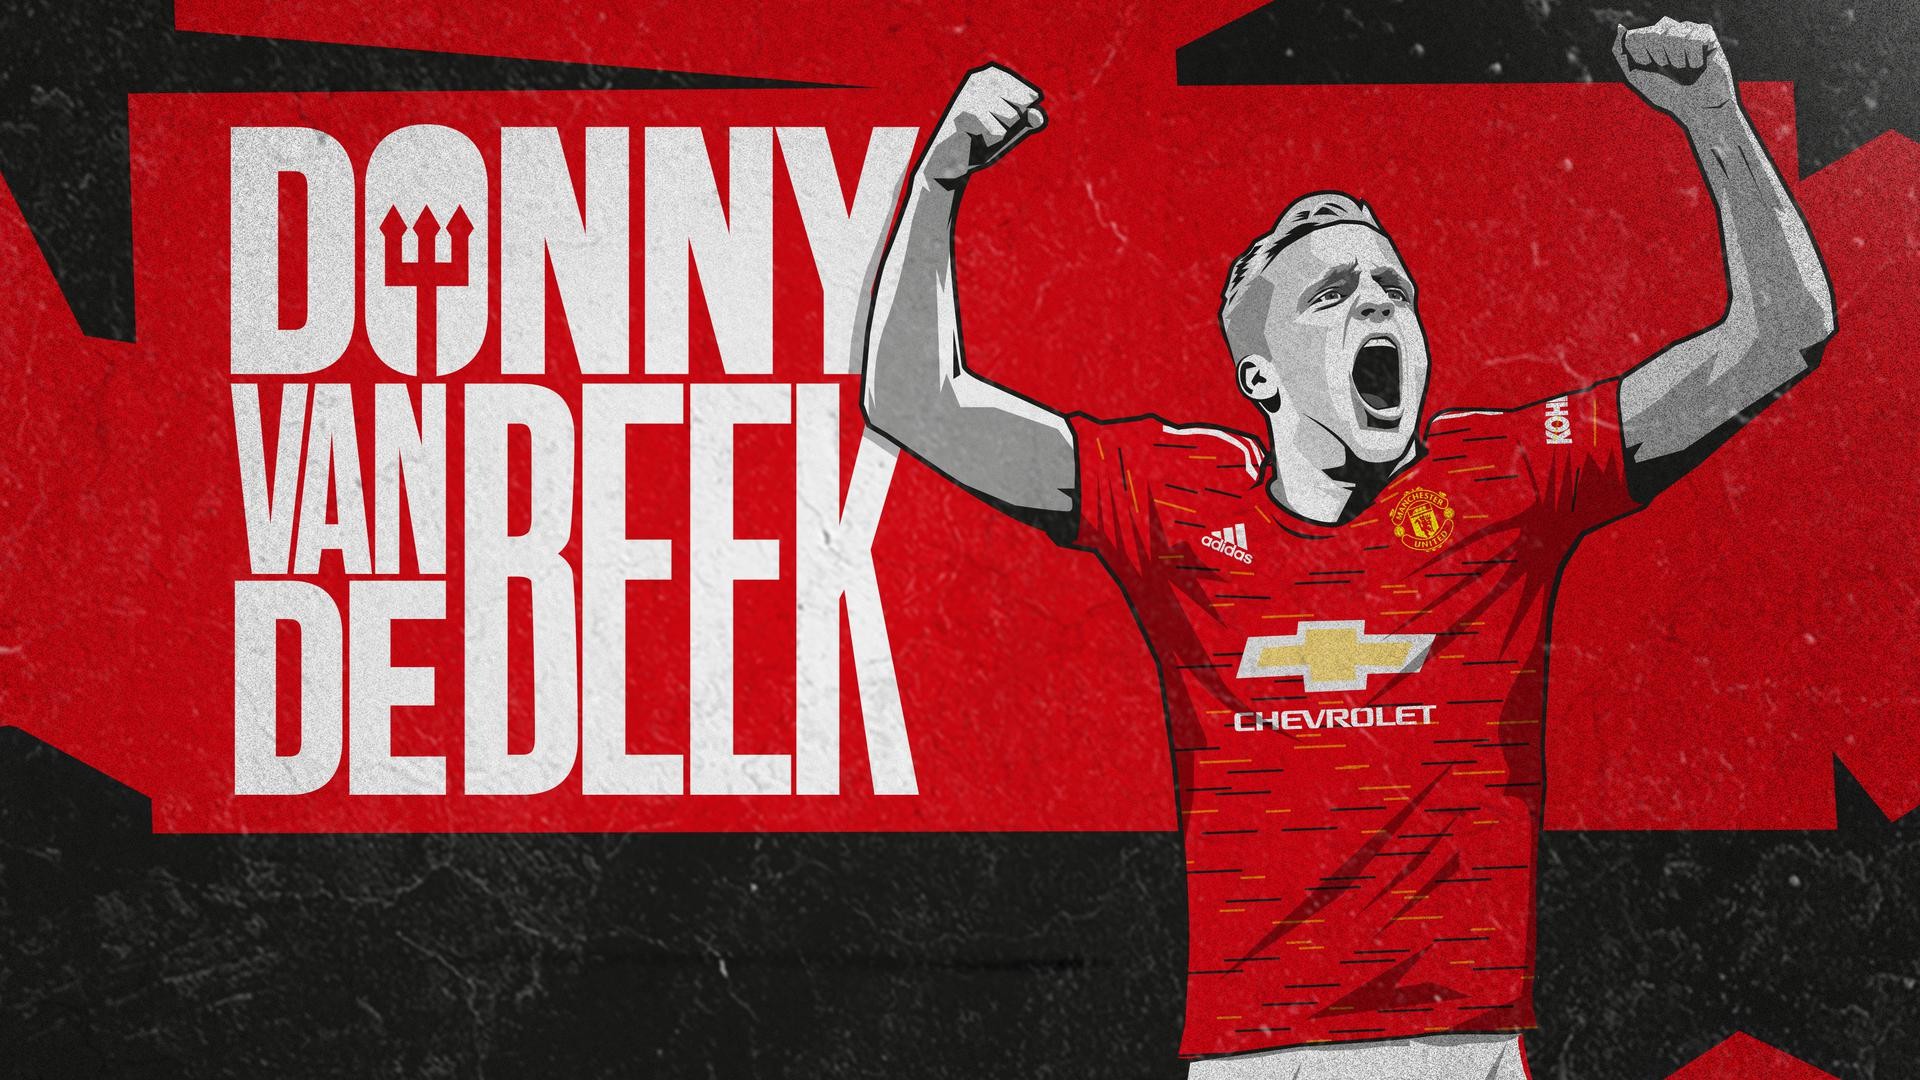 Donny Van De Beek Manchester United Wallpaper HD with high-resolution 1920x1080 pixel. You can use this wallpaper for your Desktop Computers, Mac Screensavers, Windows Backgrounds, iPhone Wallpapers, Tablet or Android Lock screen and another Mobile device